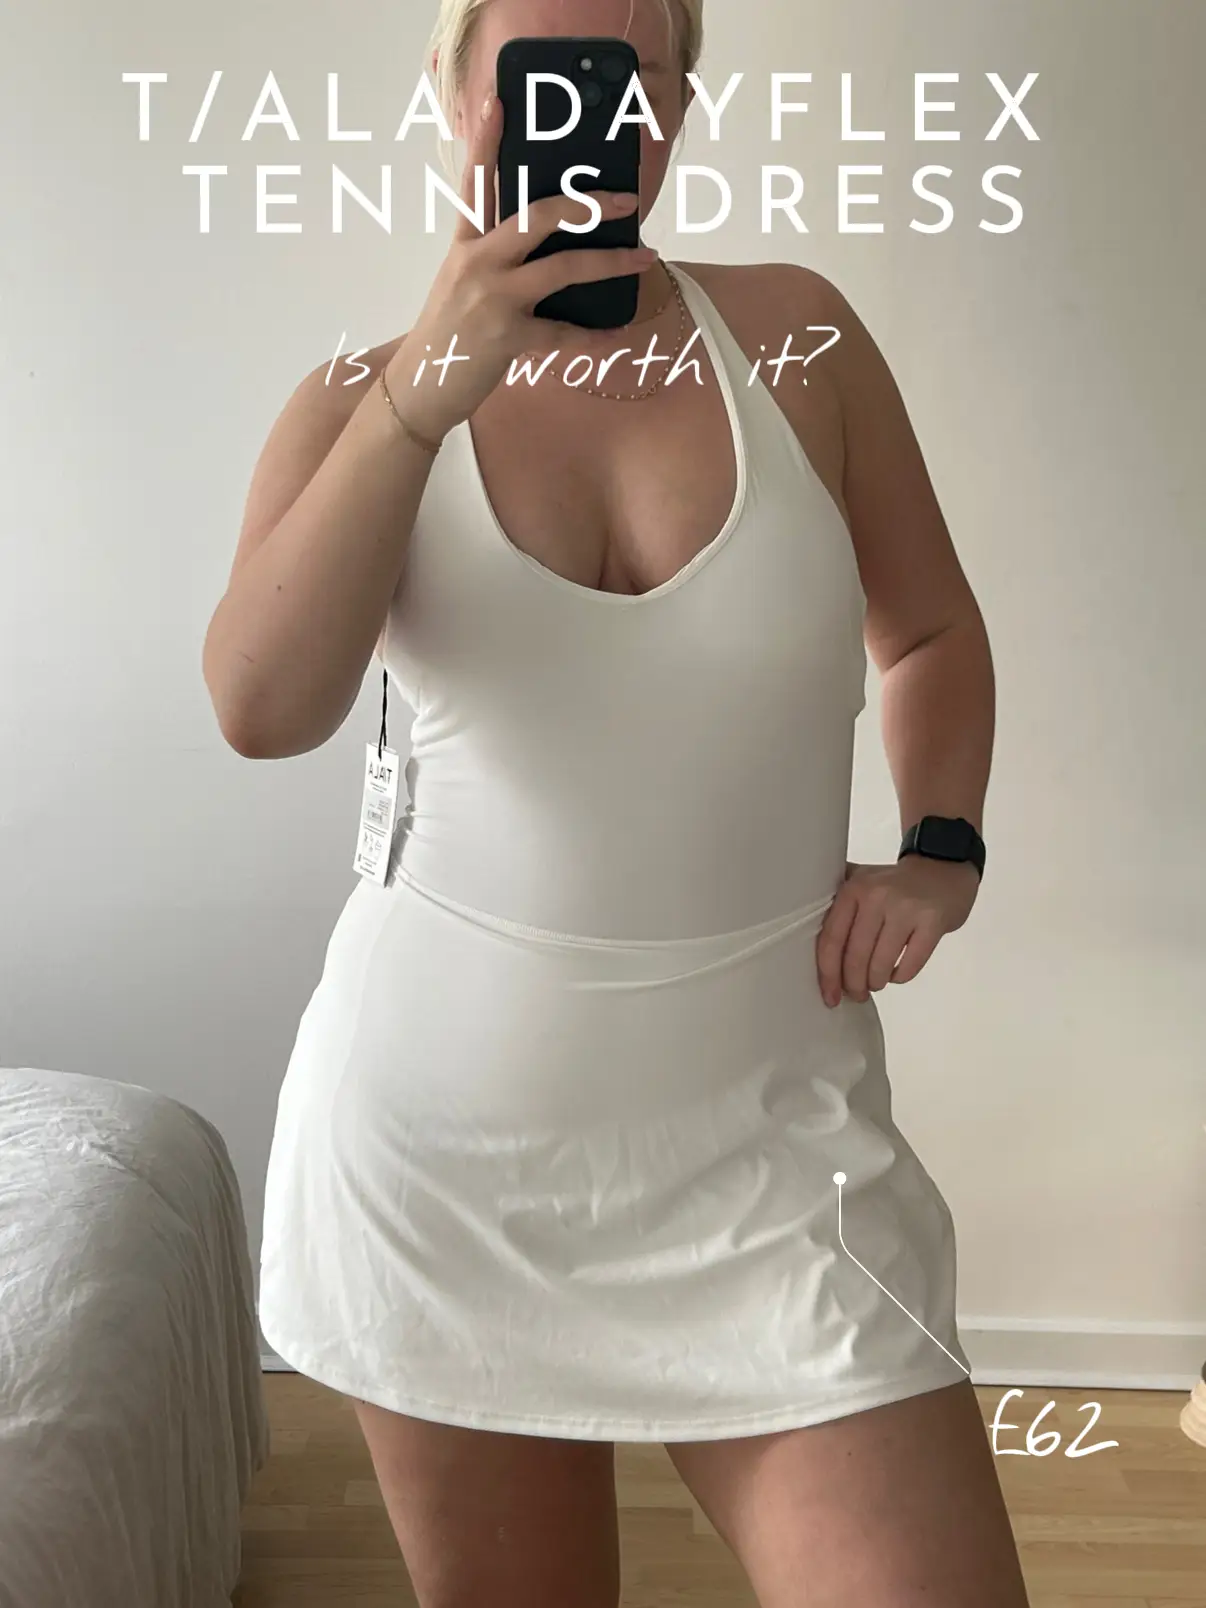 Is the T/ALA Dayflex Tennis Dress worth it?, Gallery posted by Penny